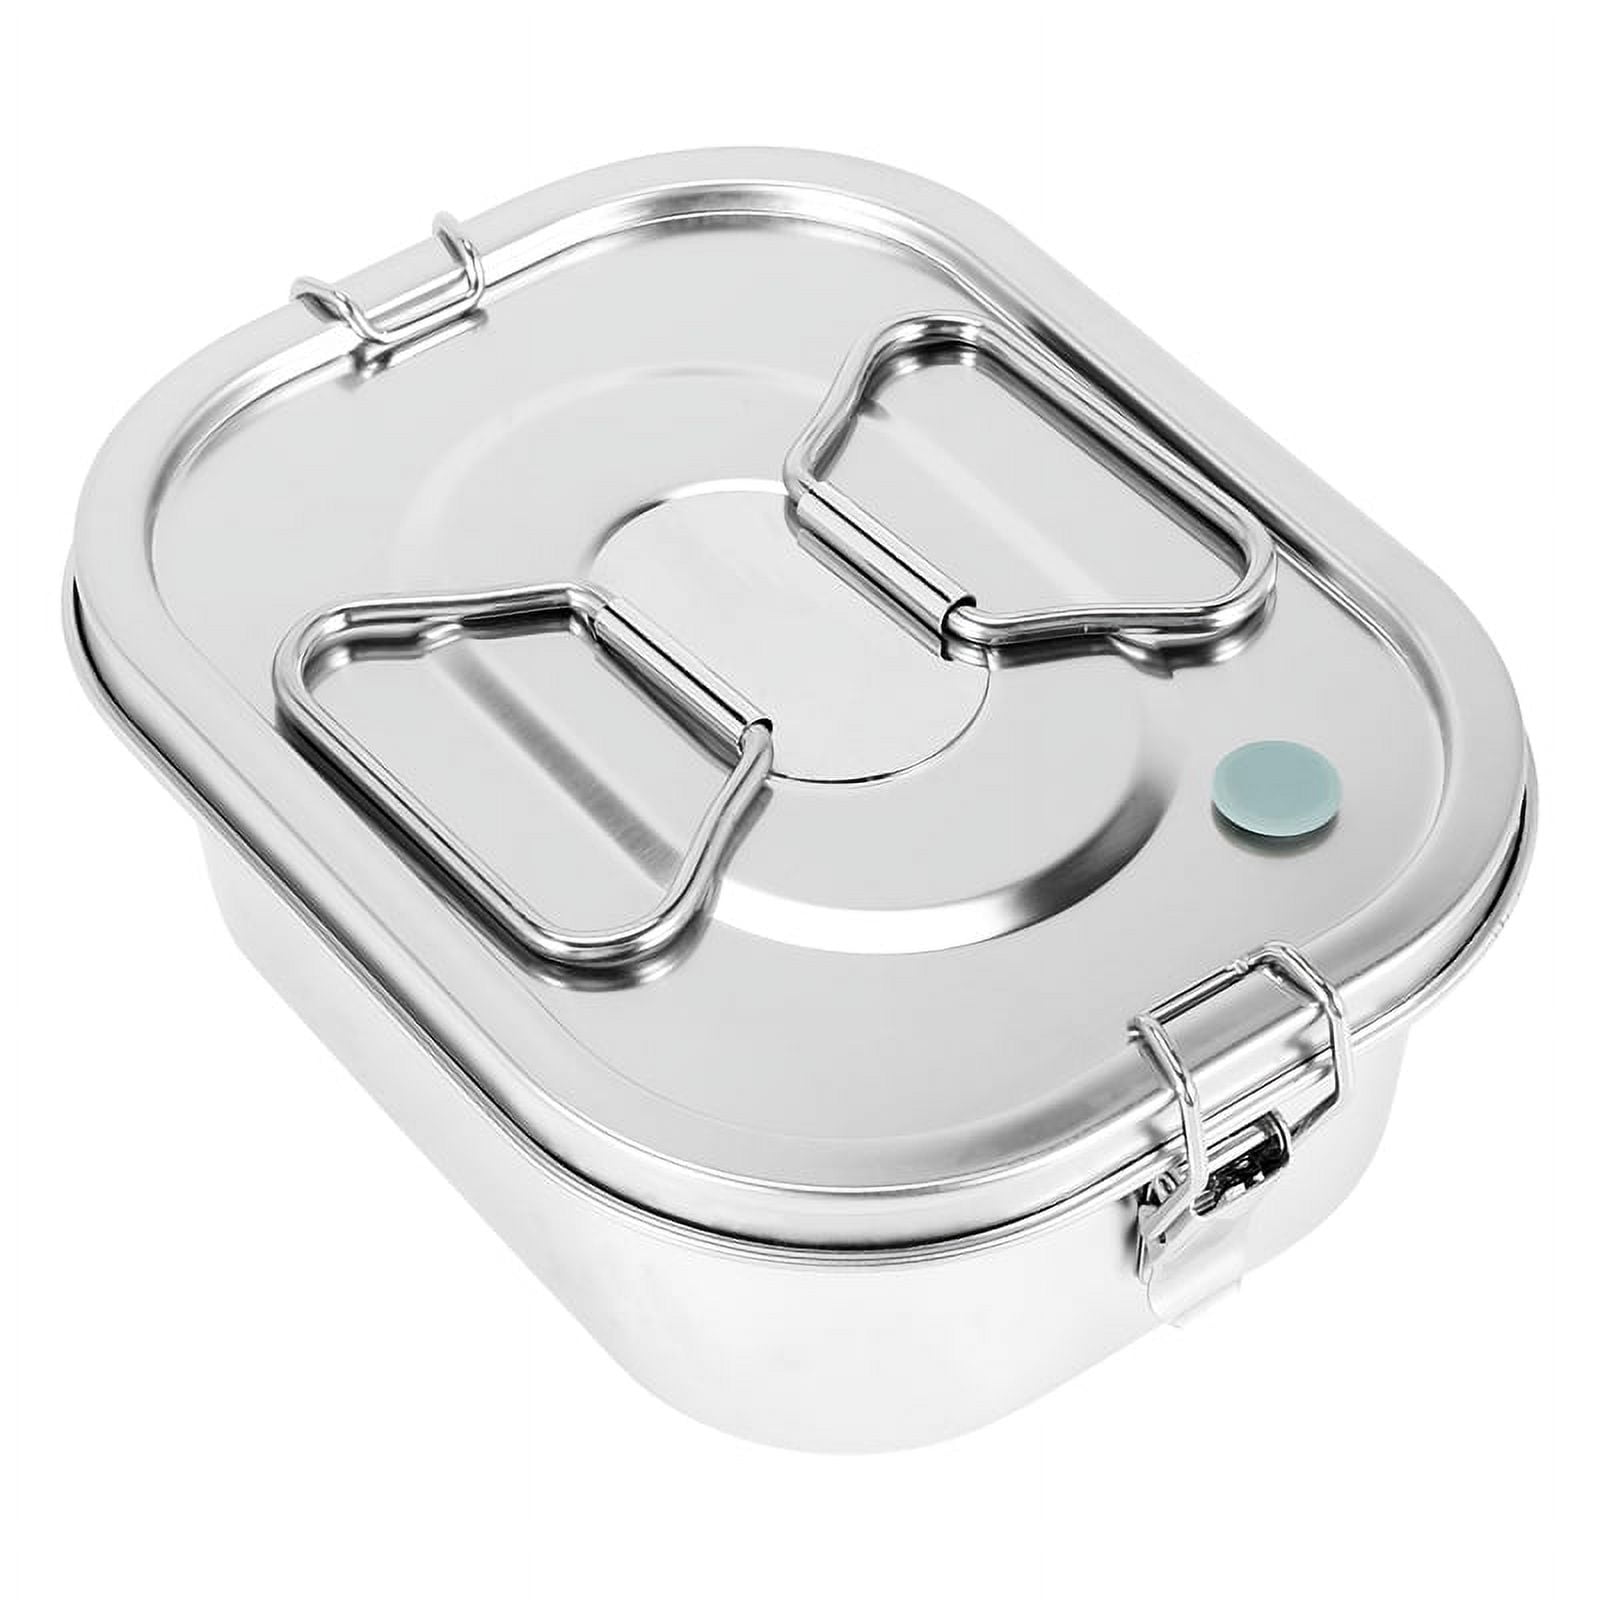 Stainless Steel Lunch box - MB Sense - Stainless Steel Bento Box